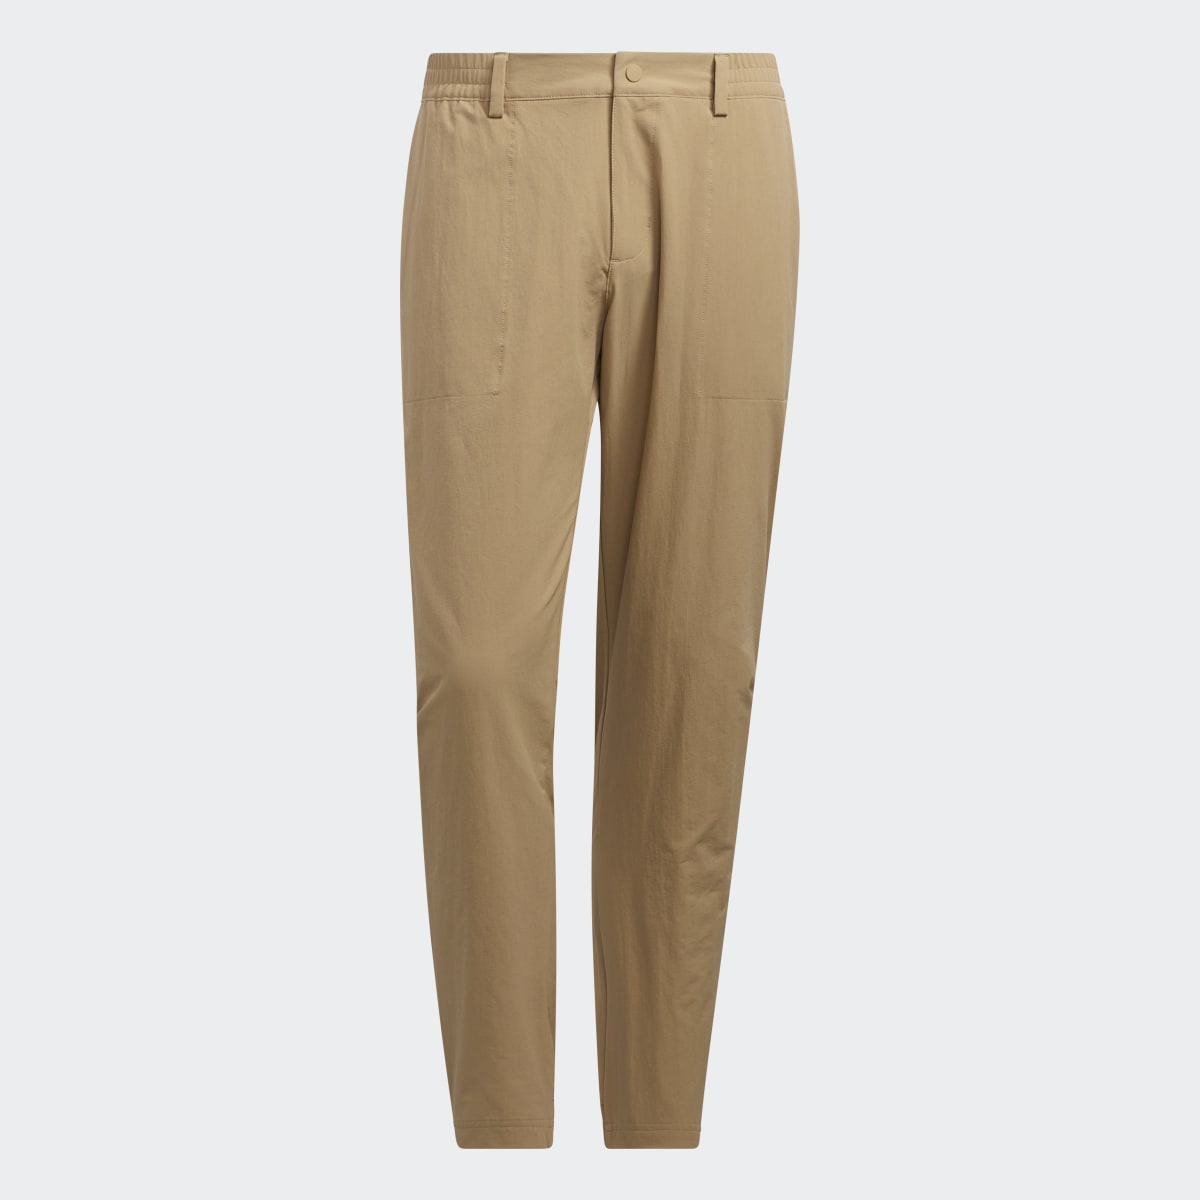 Adidas Go-To Commuter Pants. 4